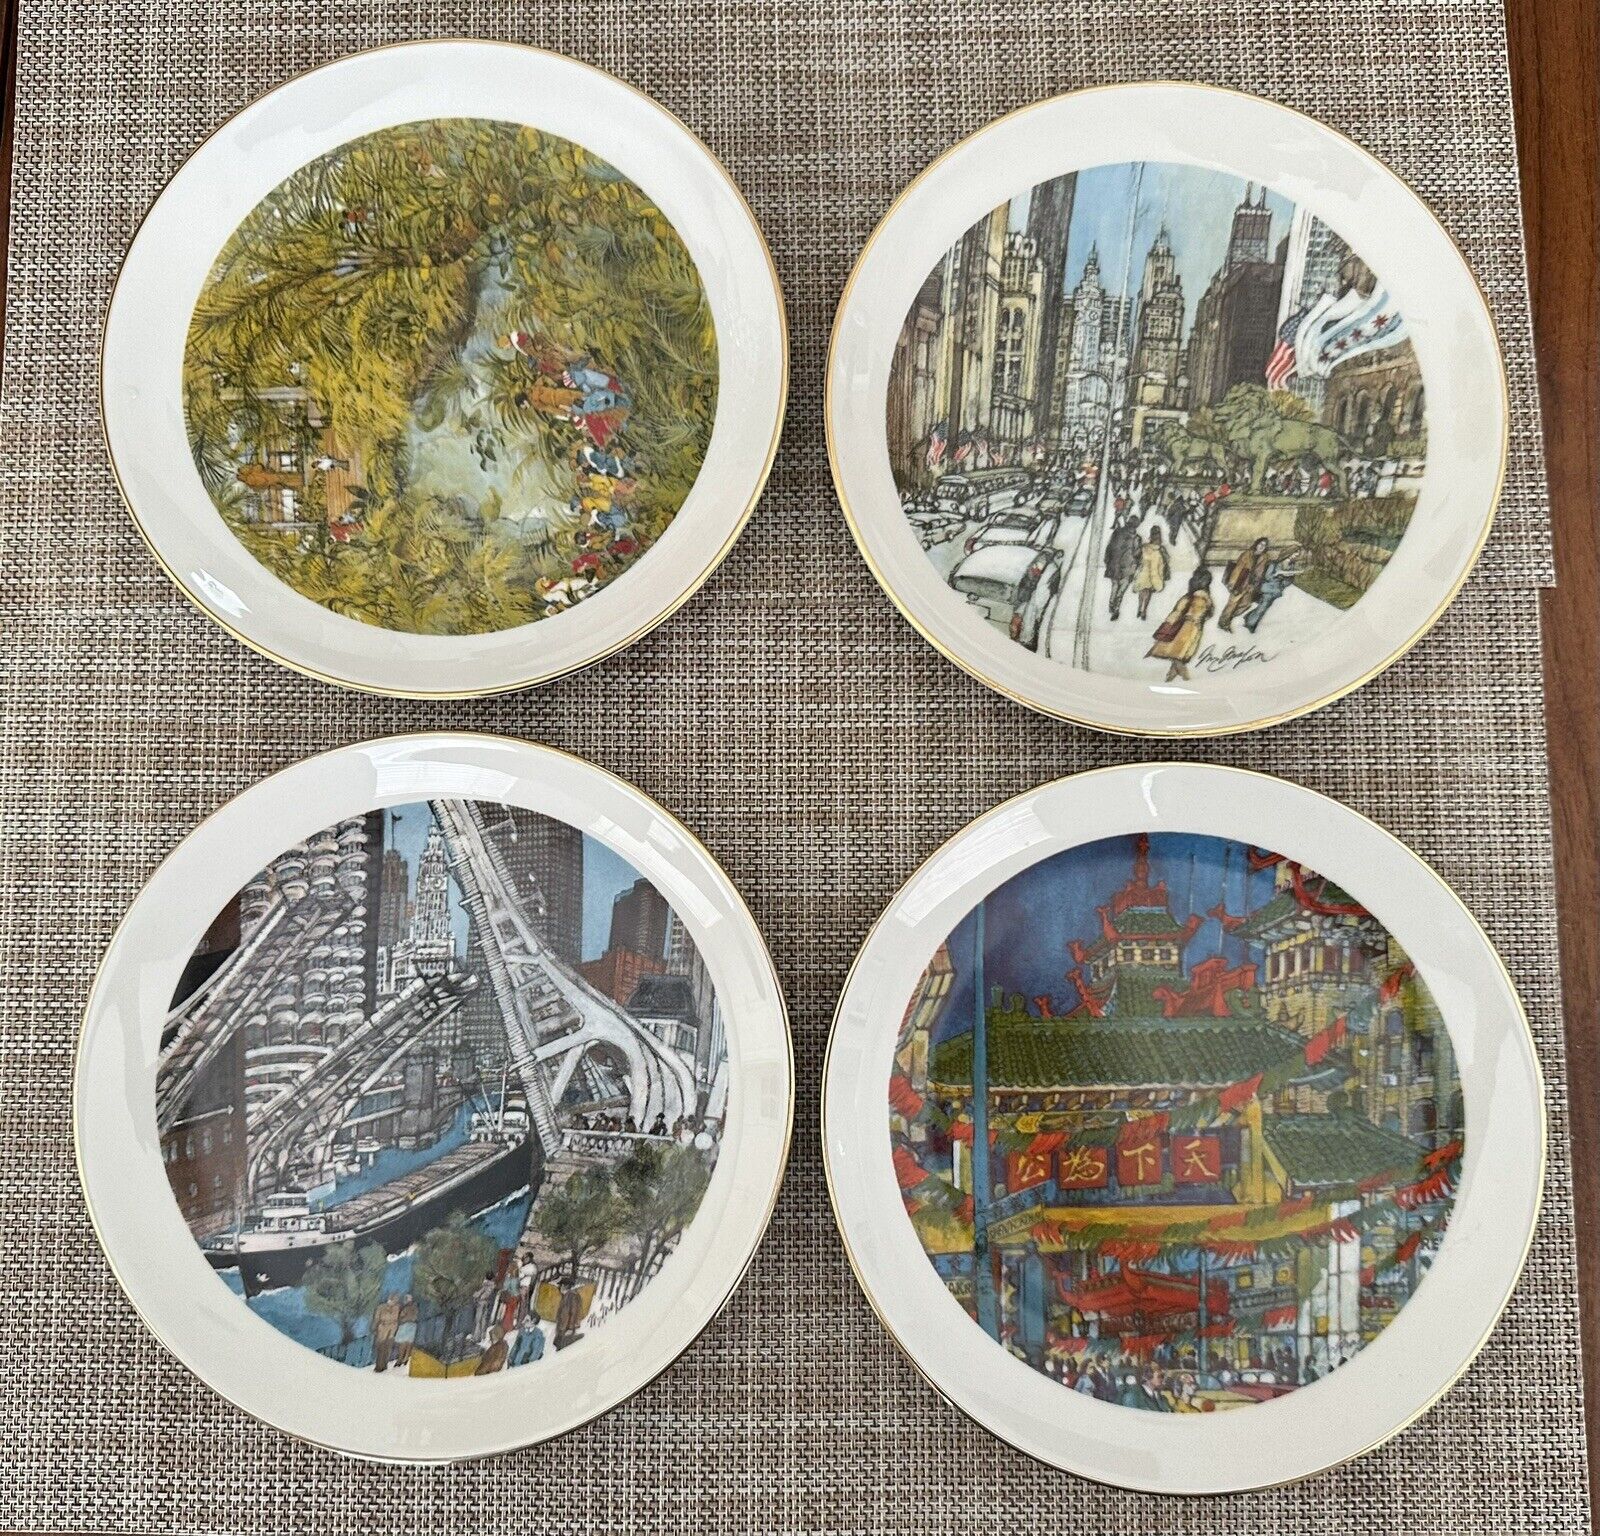 Vintage Franklin McMahon Plates, Limited Chicago Edition - Set of Four